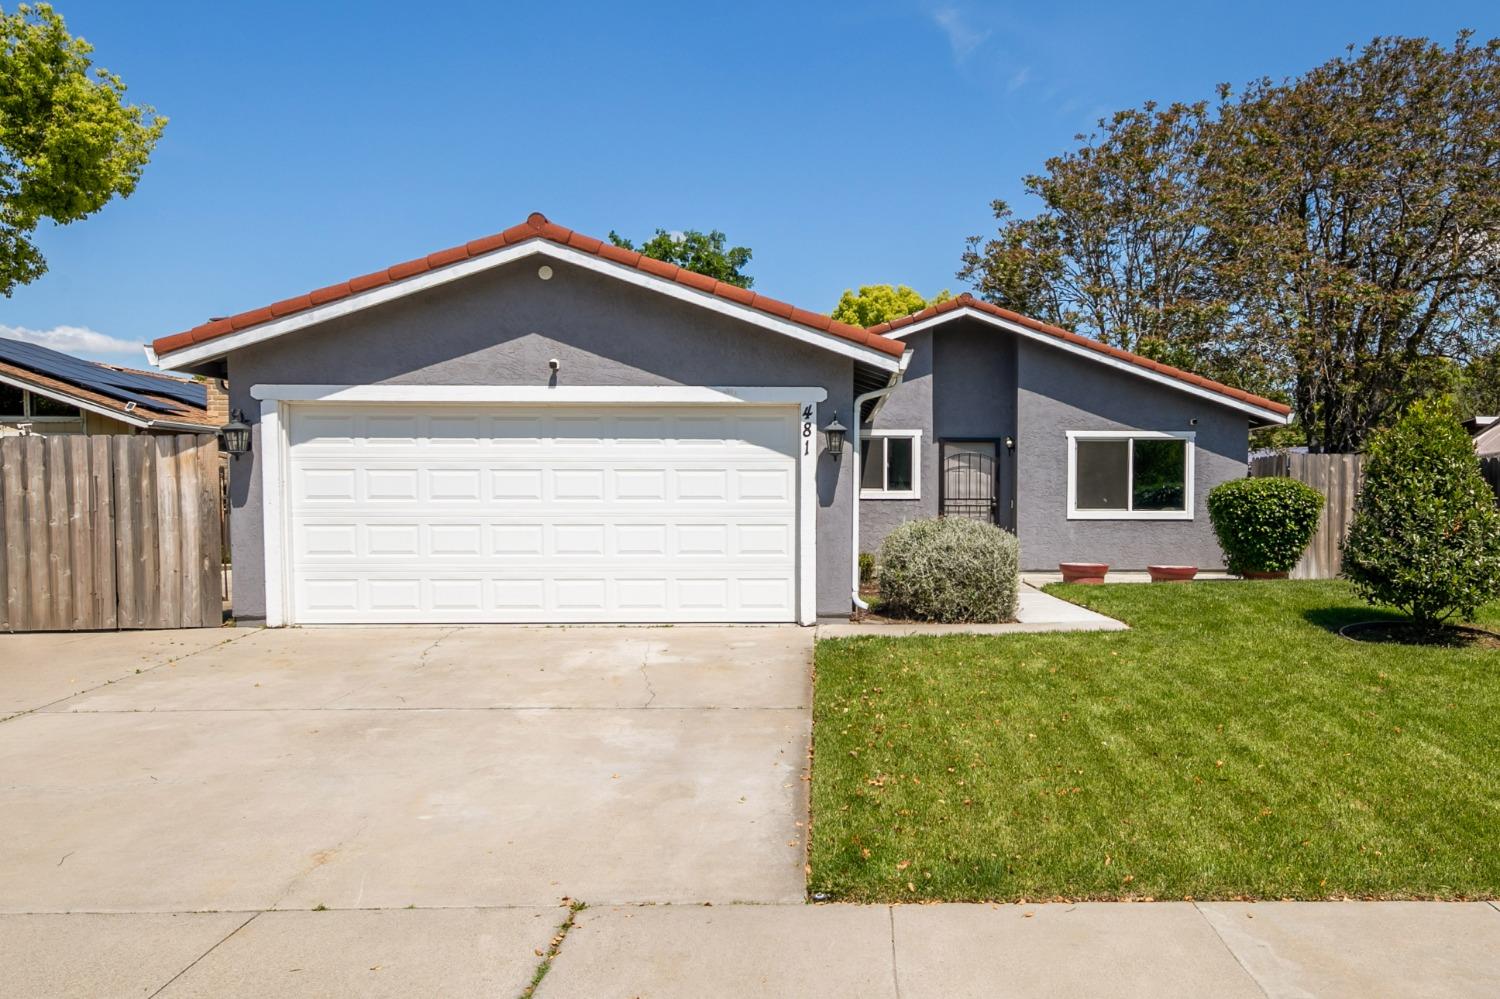 Photo of 481 Seville Wy in Manteca, CA